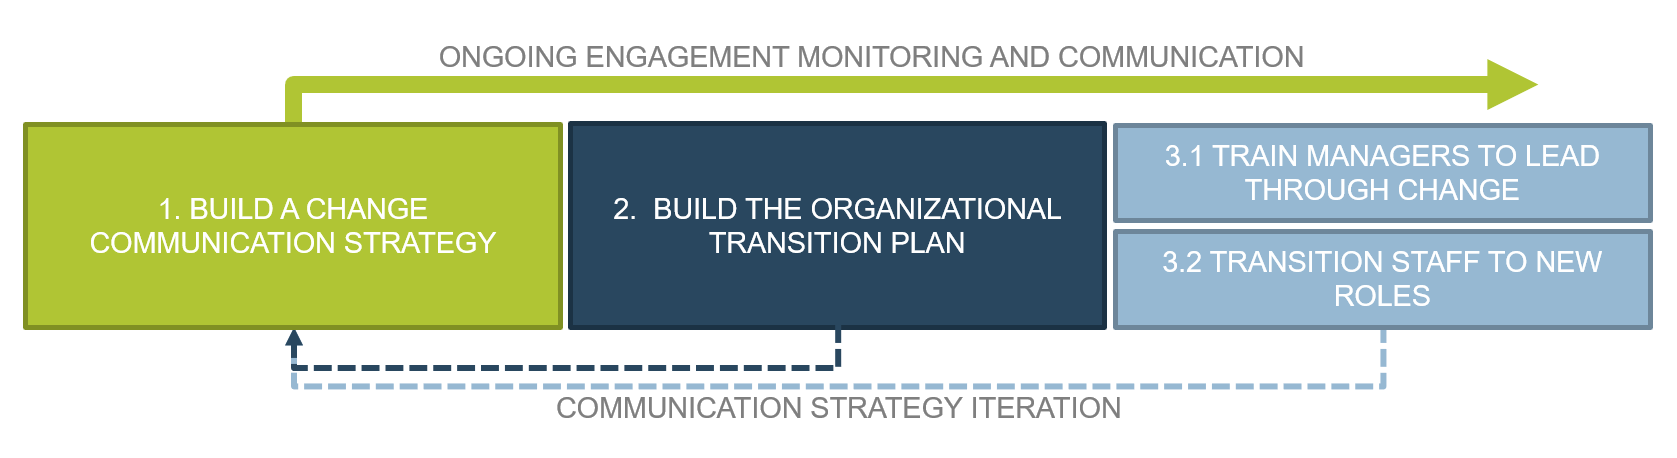 A graphic with 3 sections: 1.BUILD A CHANGE COMMUNICATION STRATEGY; 2.BUILD THE ORGANIZATIONAL TRANSITION PLAN; 3.1 TRAIN MANAGERS TO LEAD THROUGH CHANGE; 3.2 TRANSITION STAFF TO NEW ROLES. An arrow emerges from point one and directs right, over the rest of the steps. Text above the arrow reads: ONGOING ENGAGEMENT MONITORING AND COMMUNICATION. Dotted arrows emerge from points two and three directing back toward point one. Text below the arrow reads: COMMUNICATION STRATEGY ITERATION.